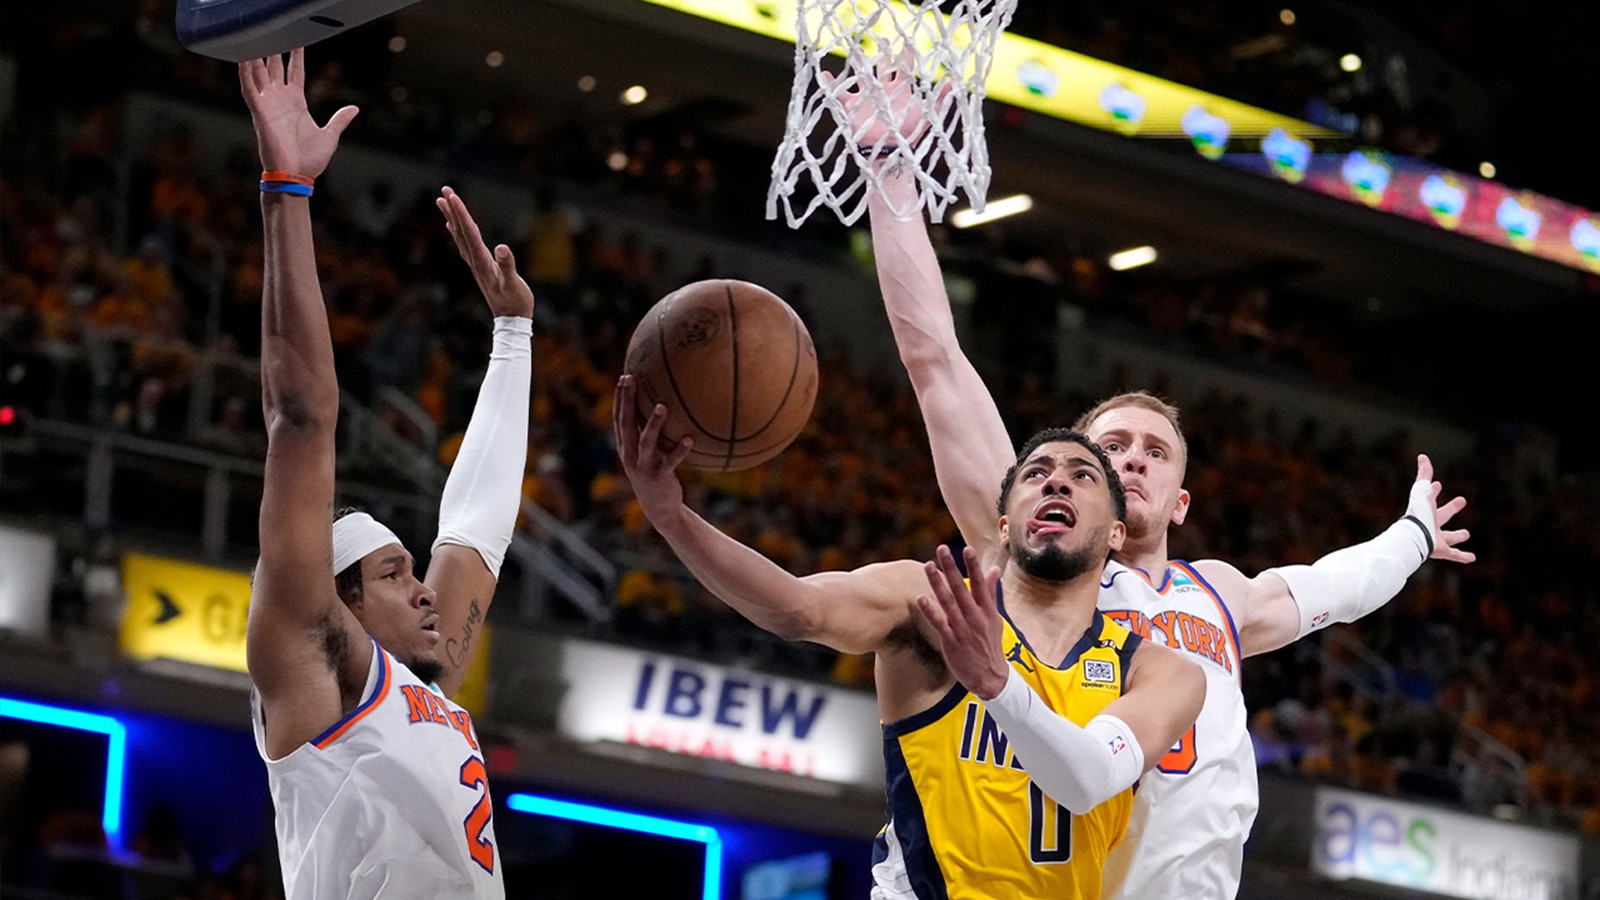 New York Knicks look to extend lead, Indiana Pacers try to even score in Game 4